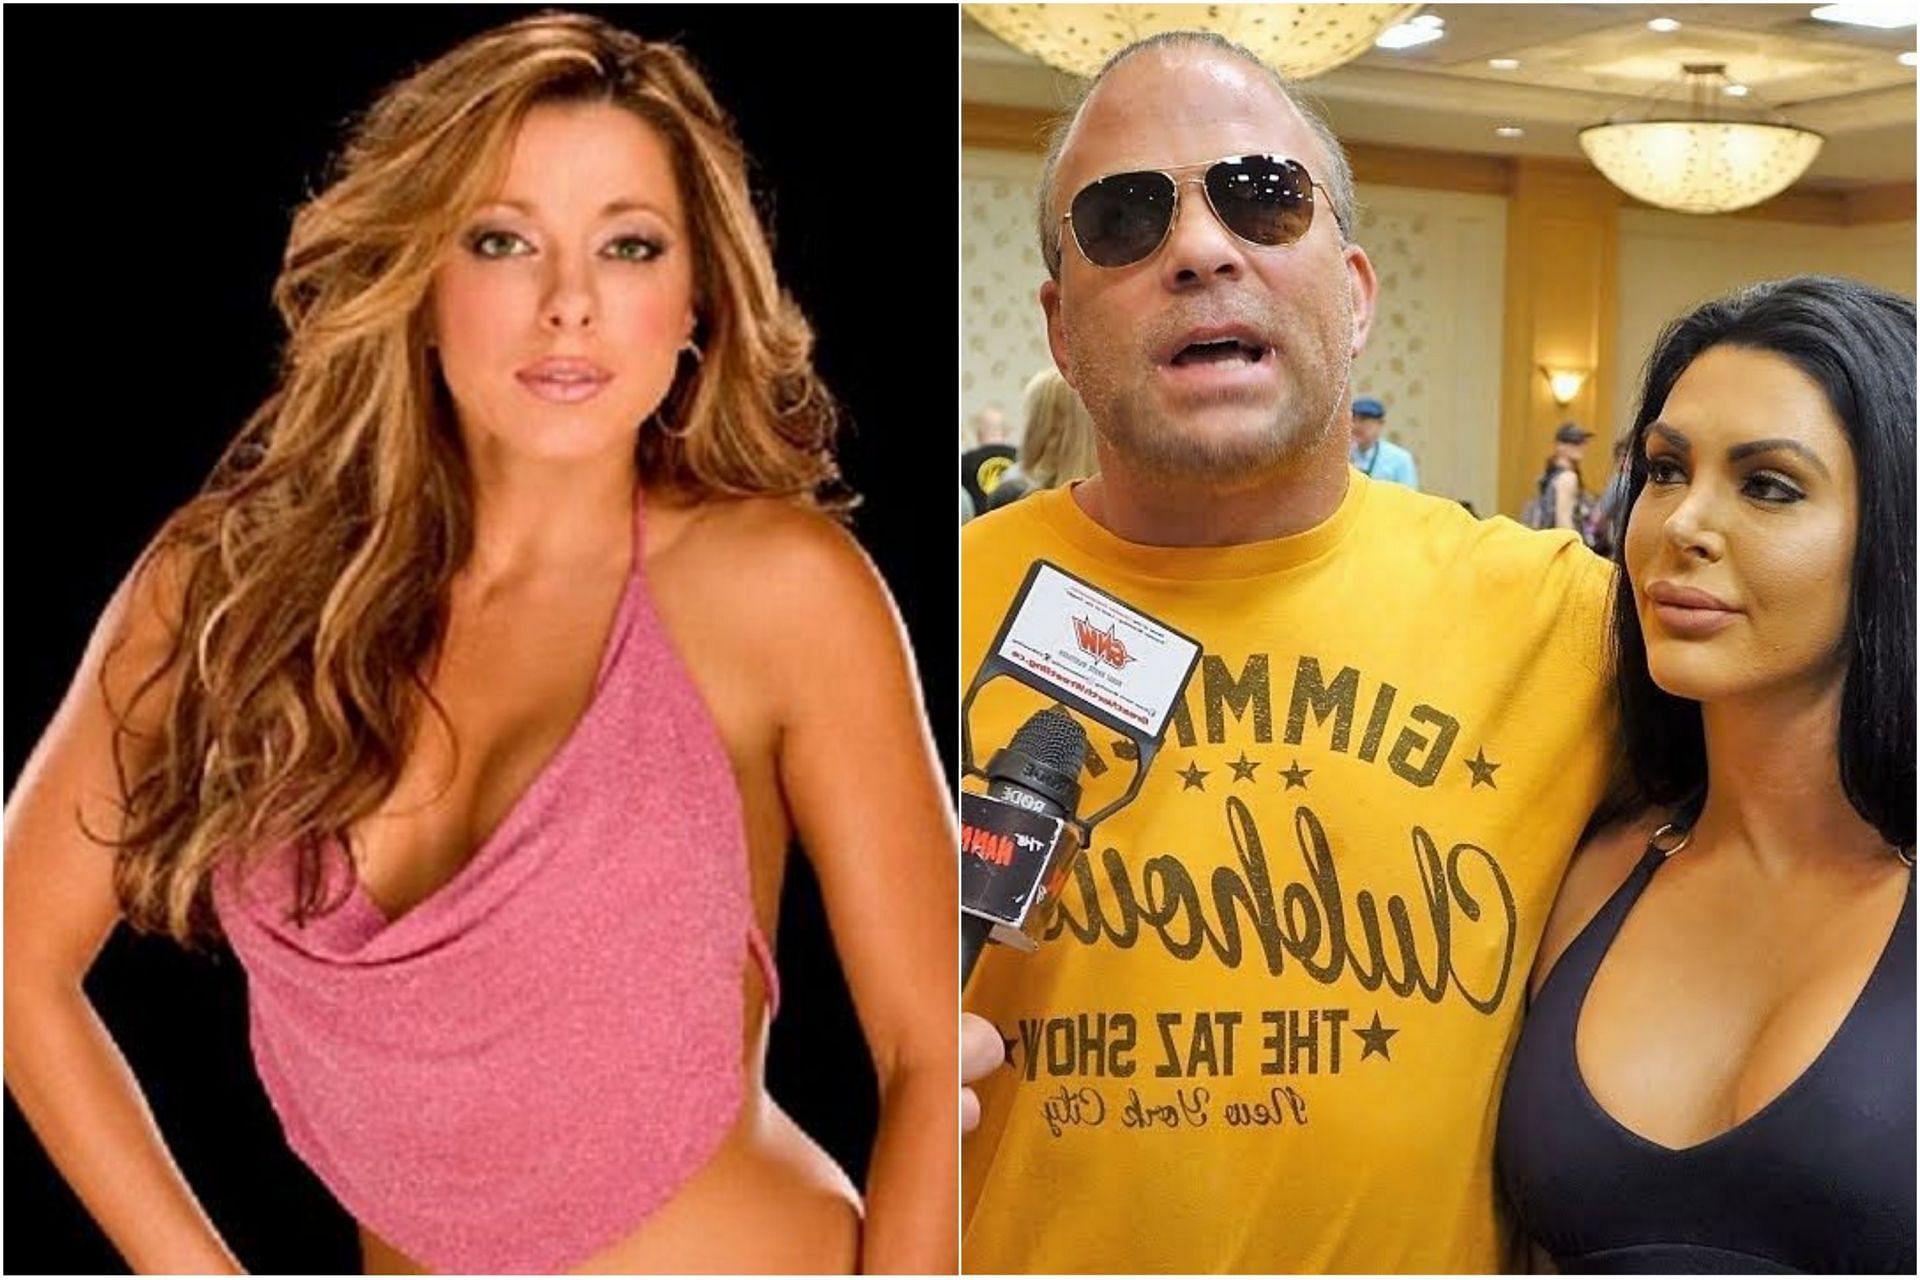 Dawn Marie (Left) and RVD with his wife (Right)